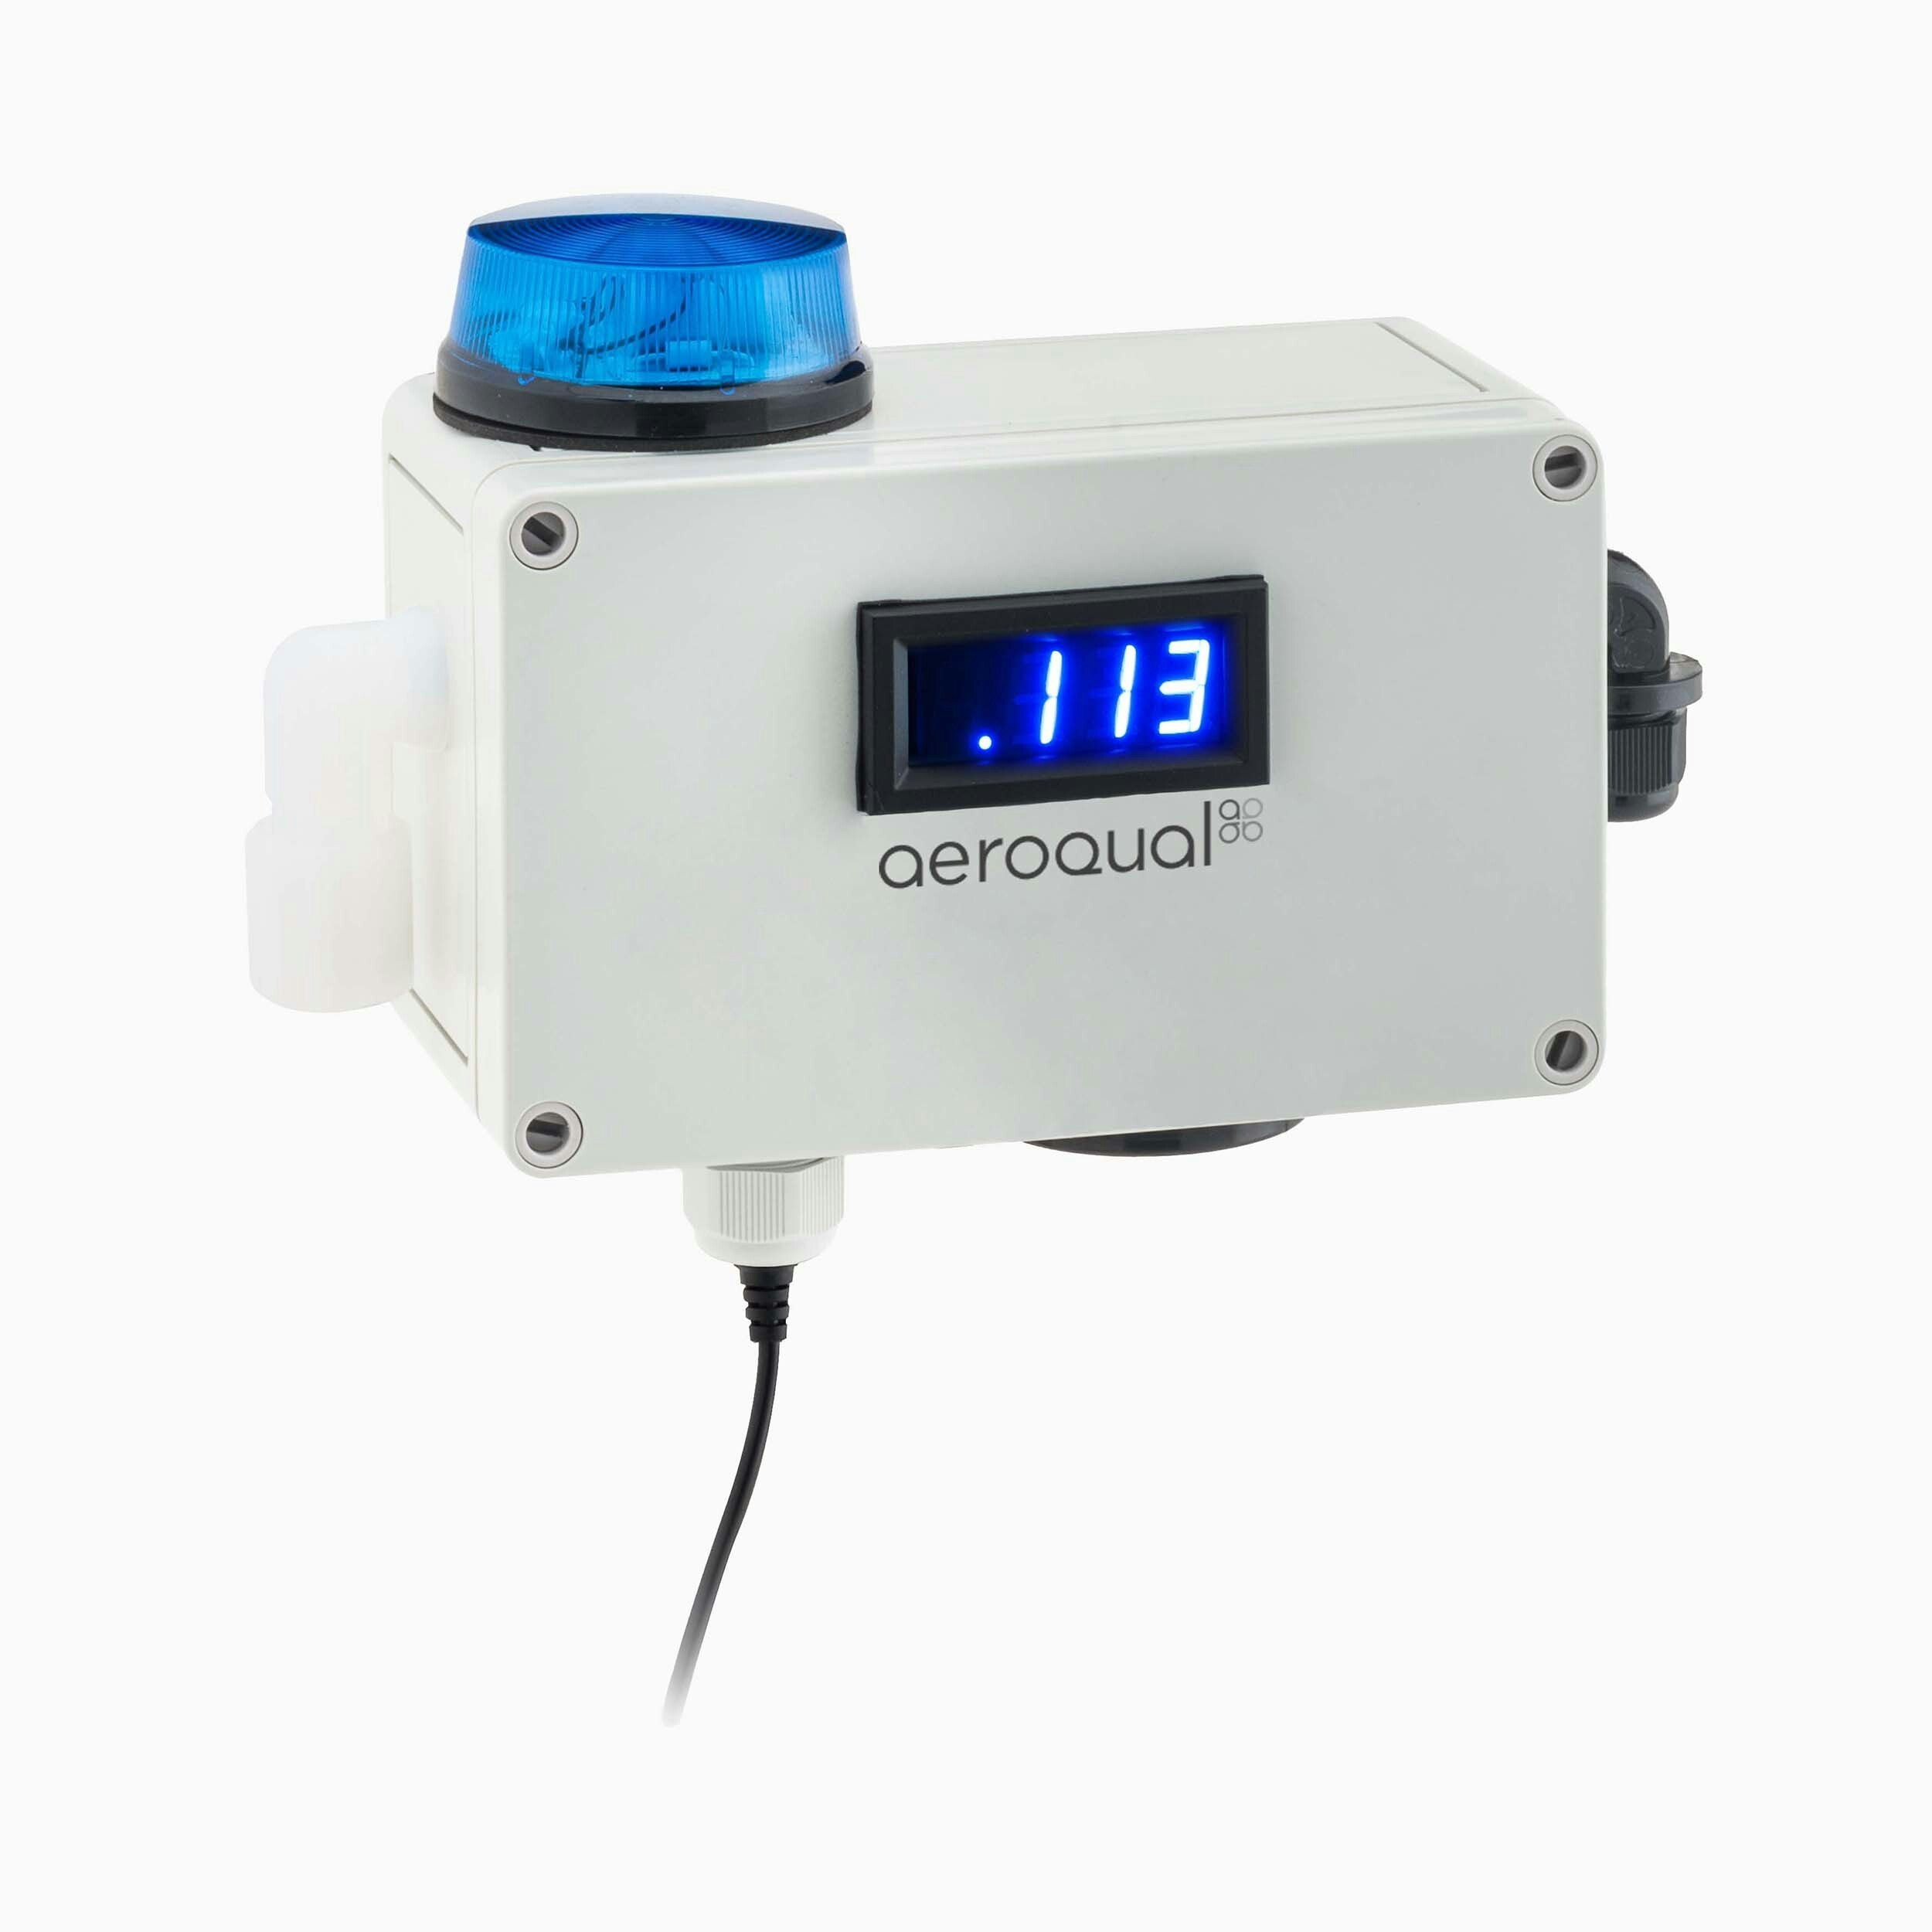 Series 930 – Fixed Indoor Air Quality Monitor